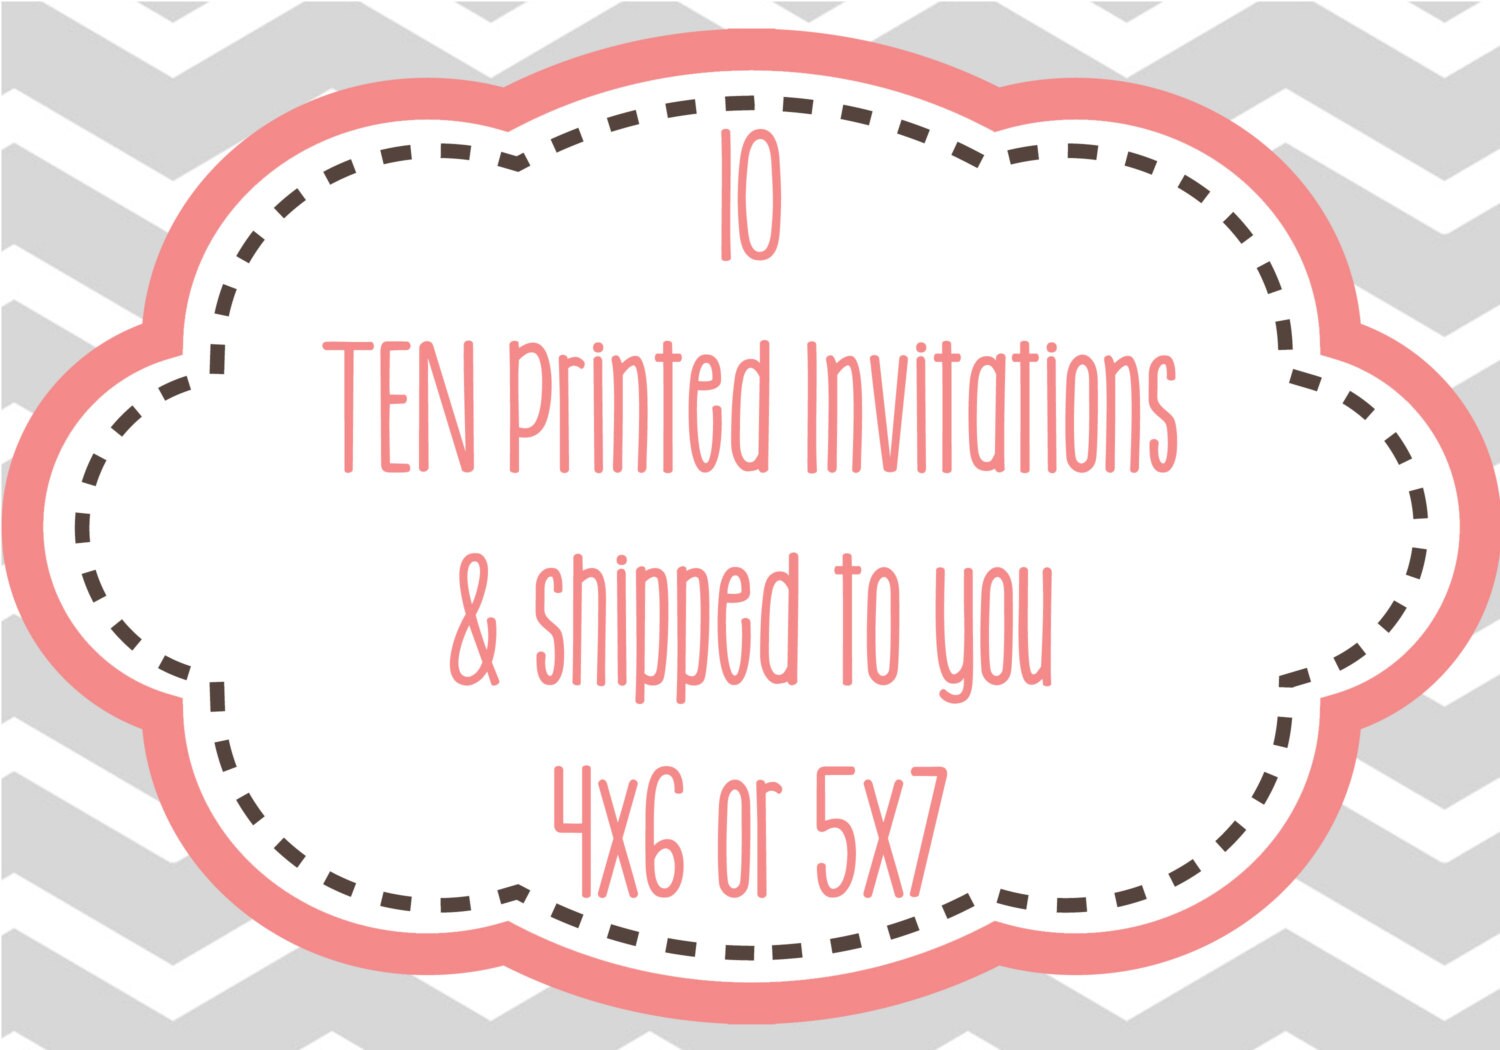 10 Printed Invitations 4x6 or 5x7 SHIPPING INCLUDED